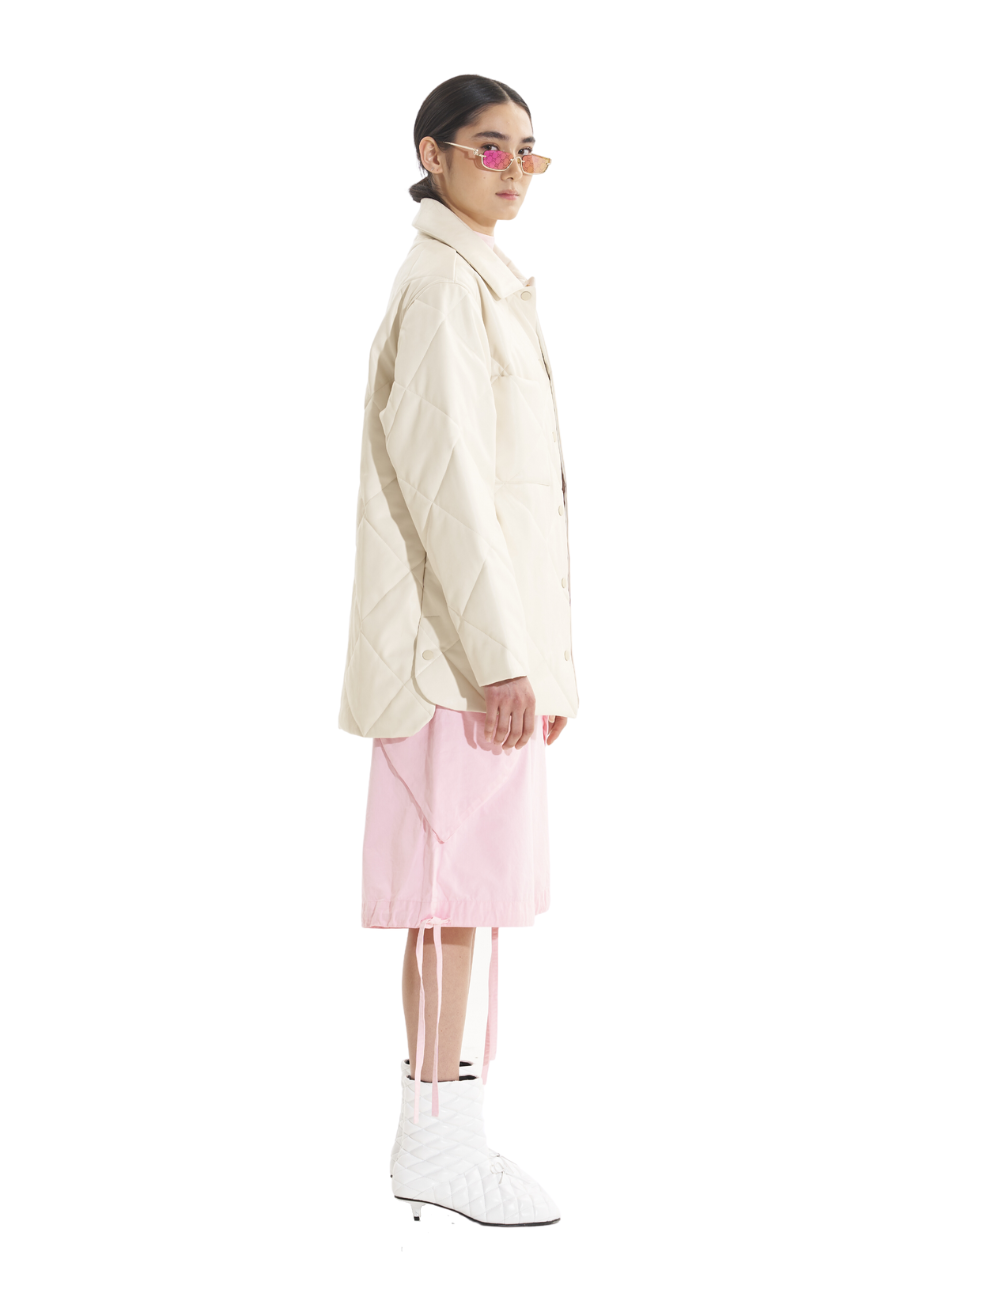 Charlie Quilted Vegan Leather Champagne White Made in Canada Outerwear